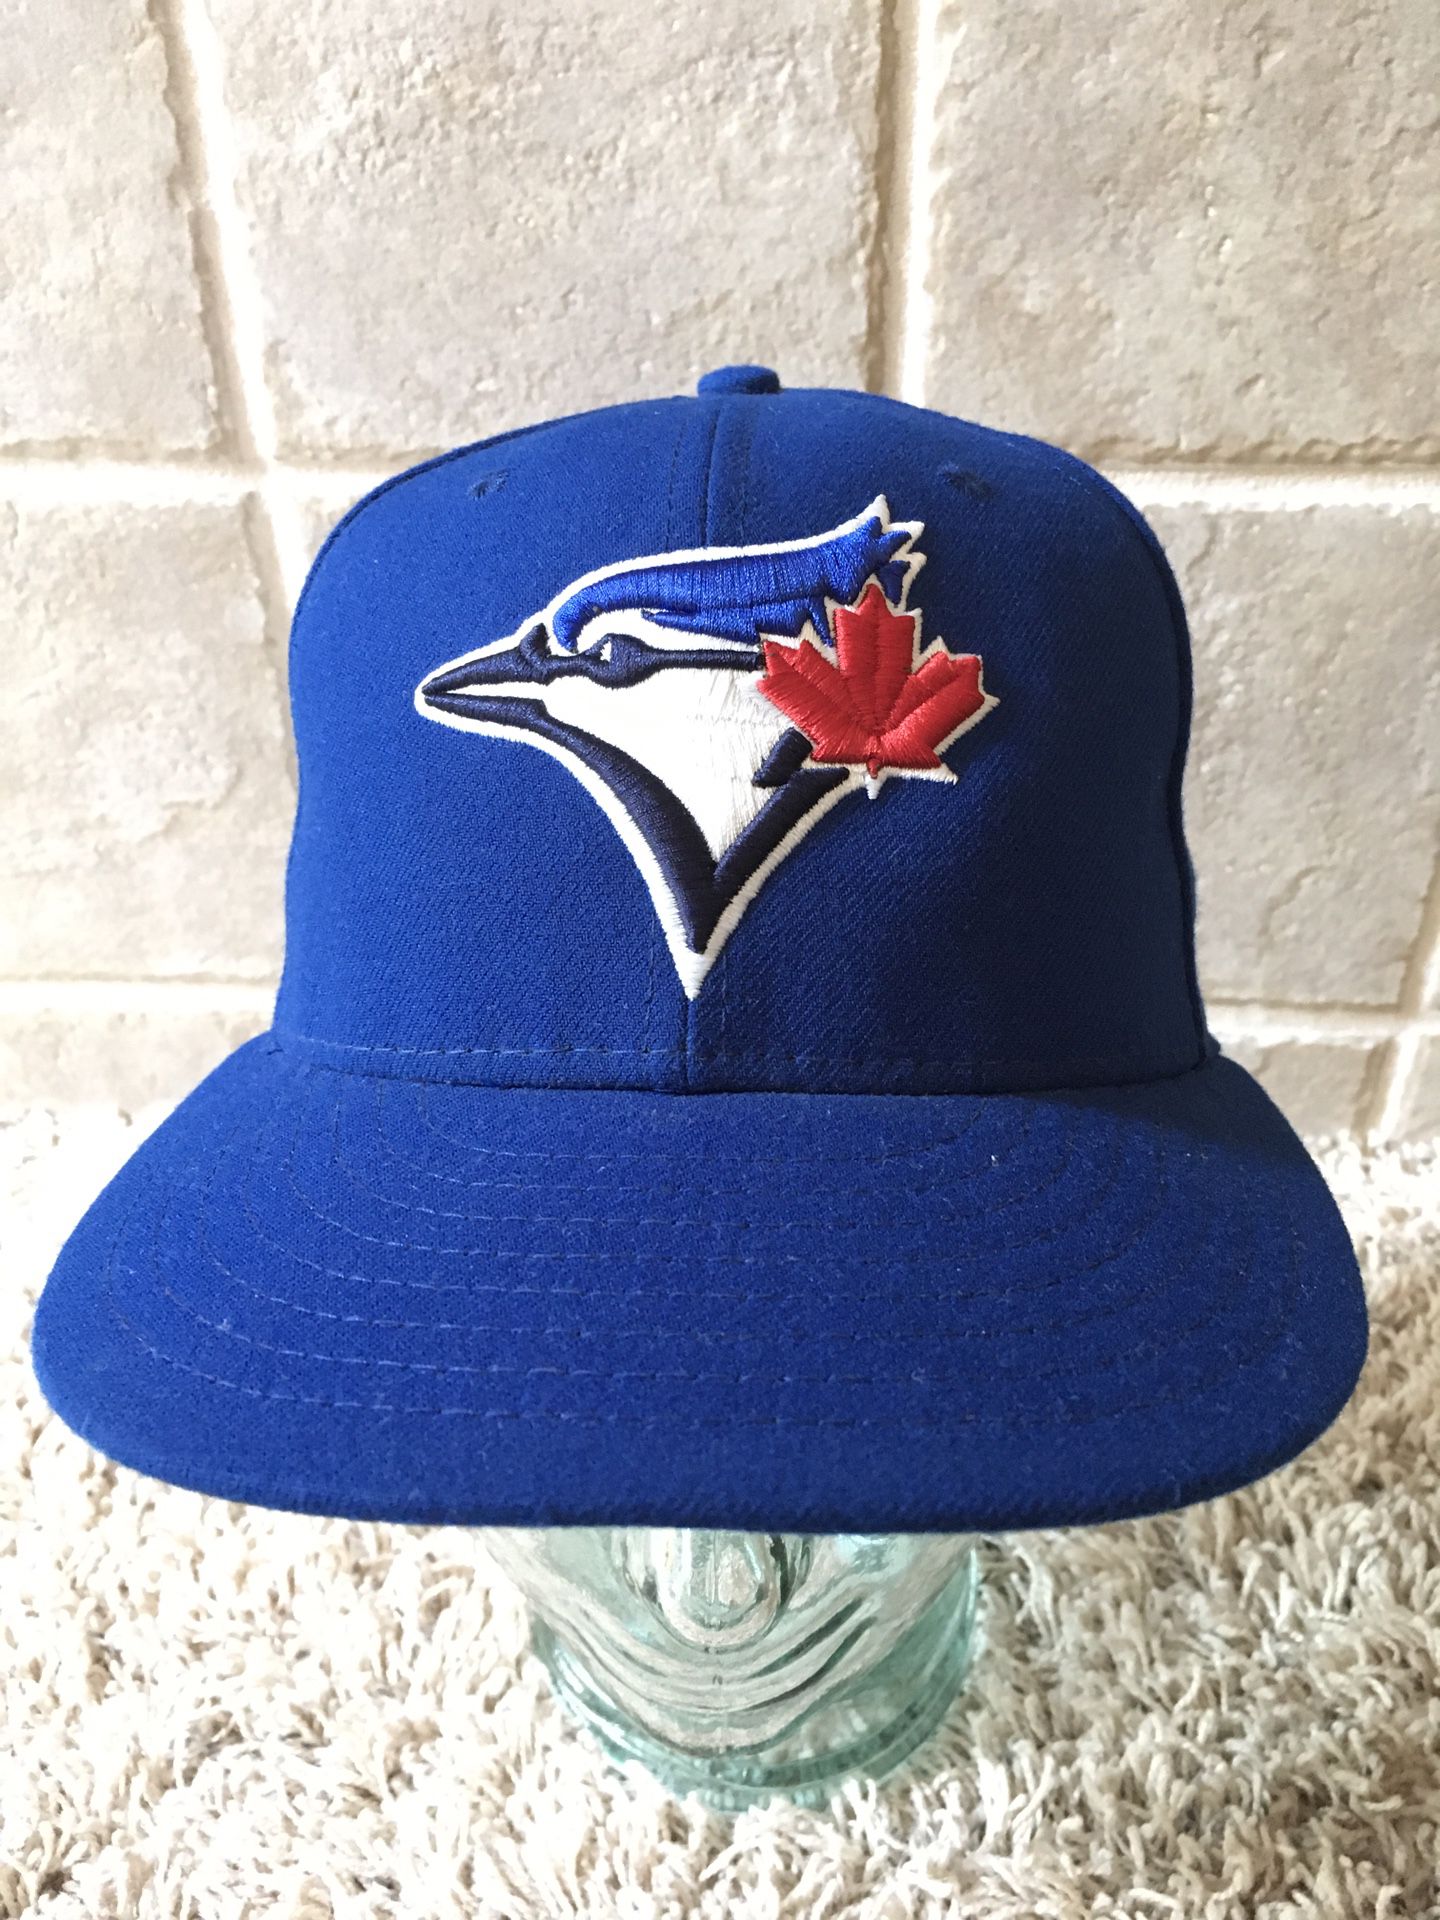 Baseball Caps Toronto BlueJays NEW for Sale in Brewster, NY - OfferUp